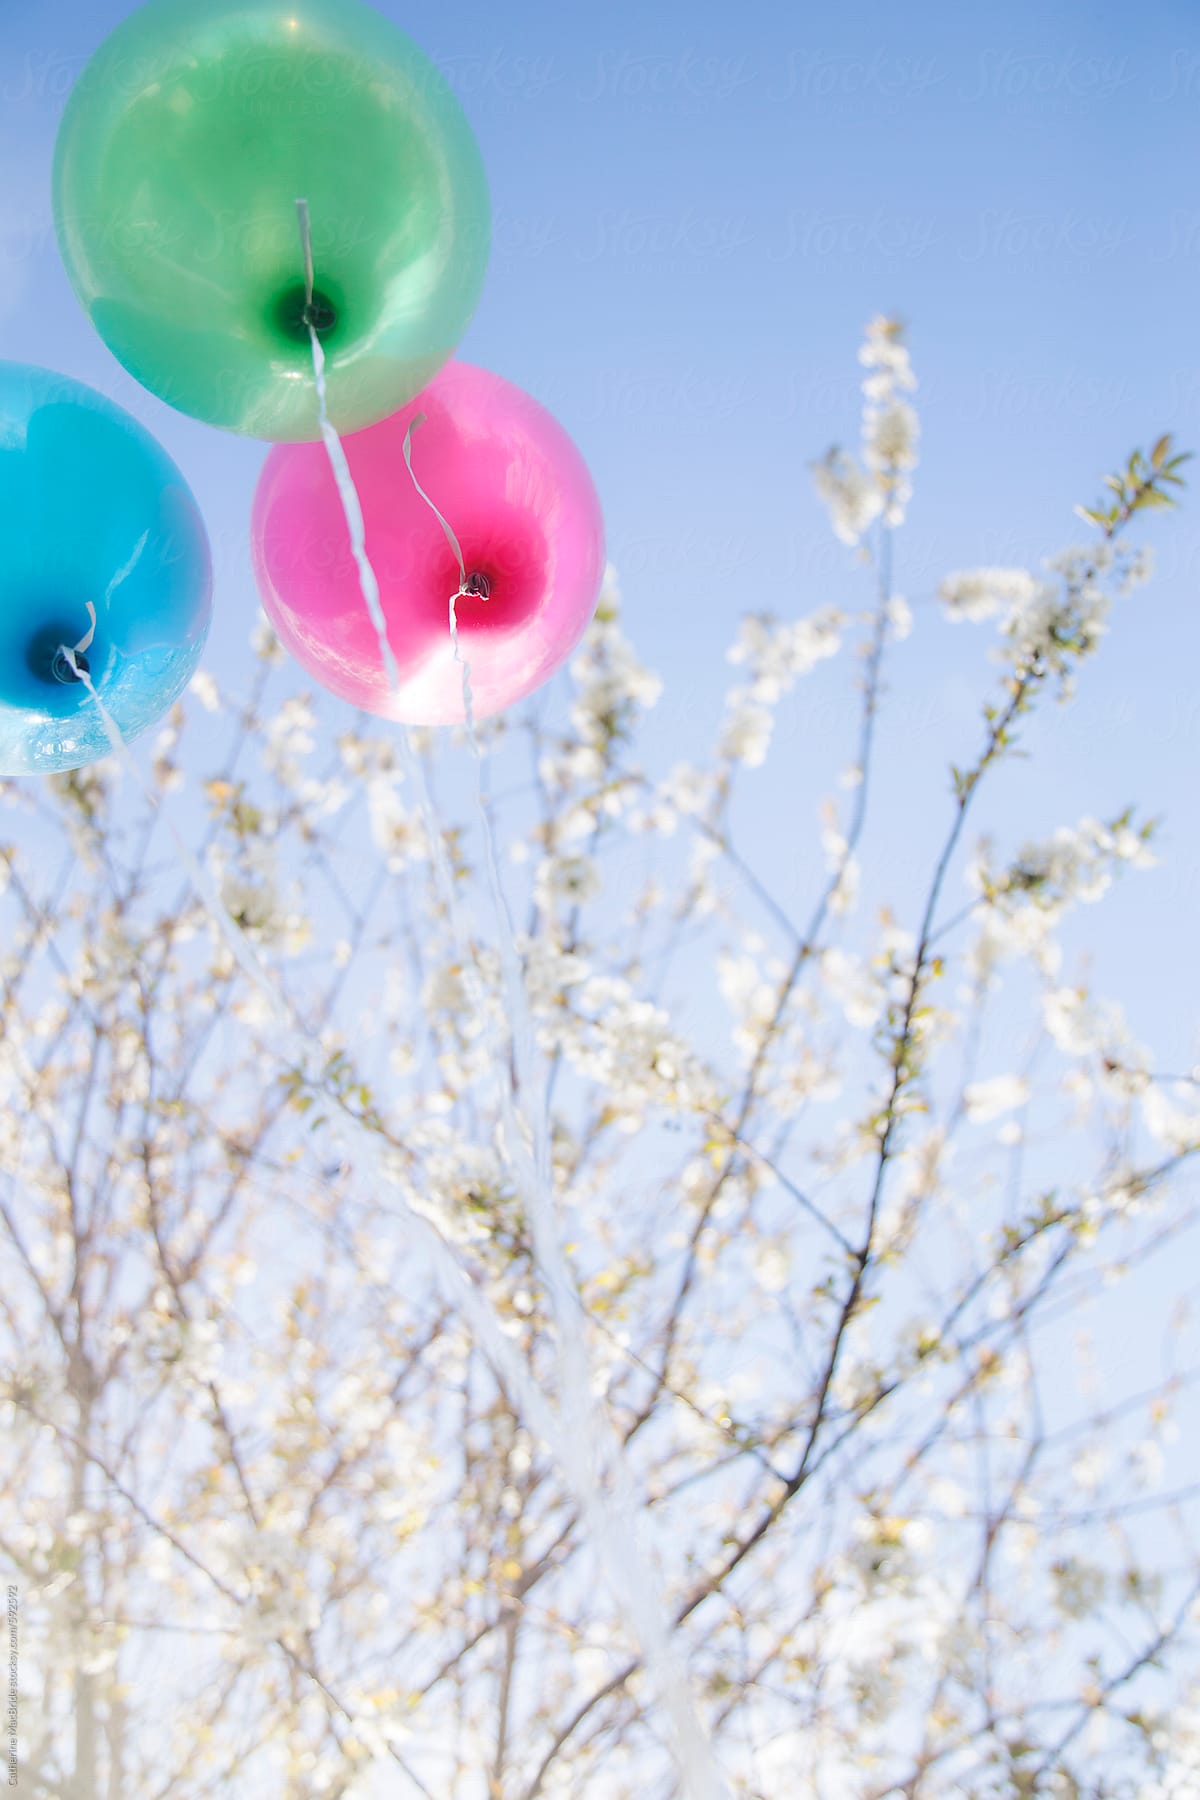 Balloons and Blossoms...